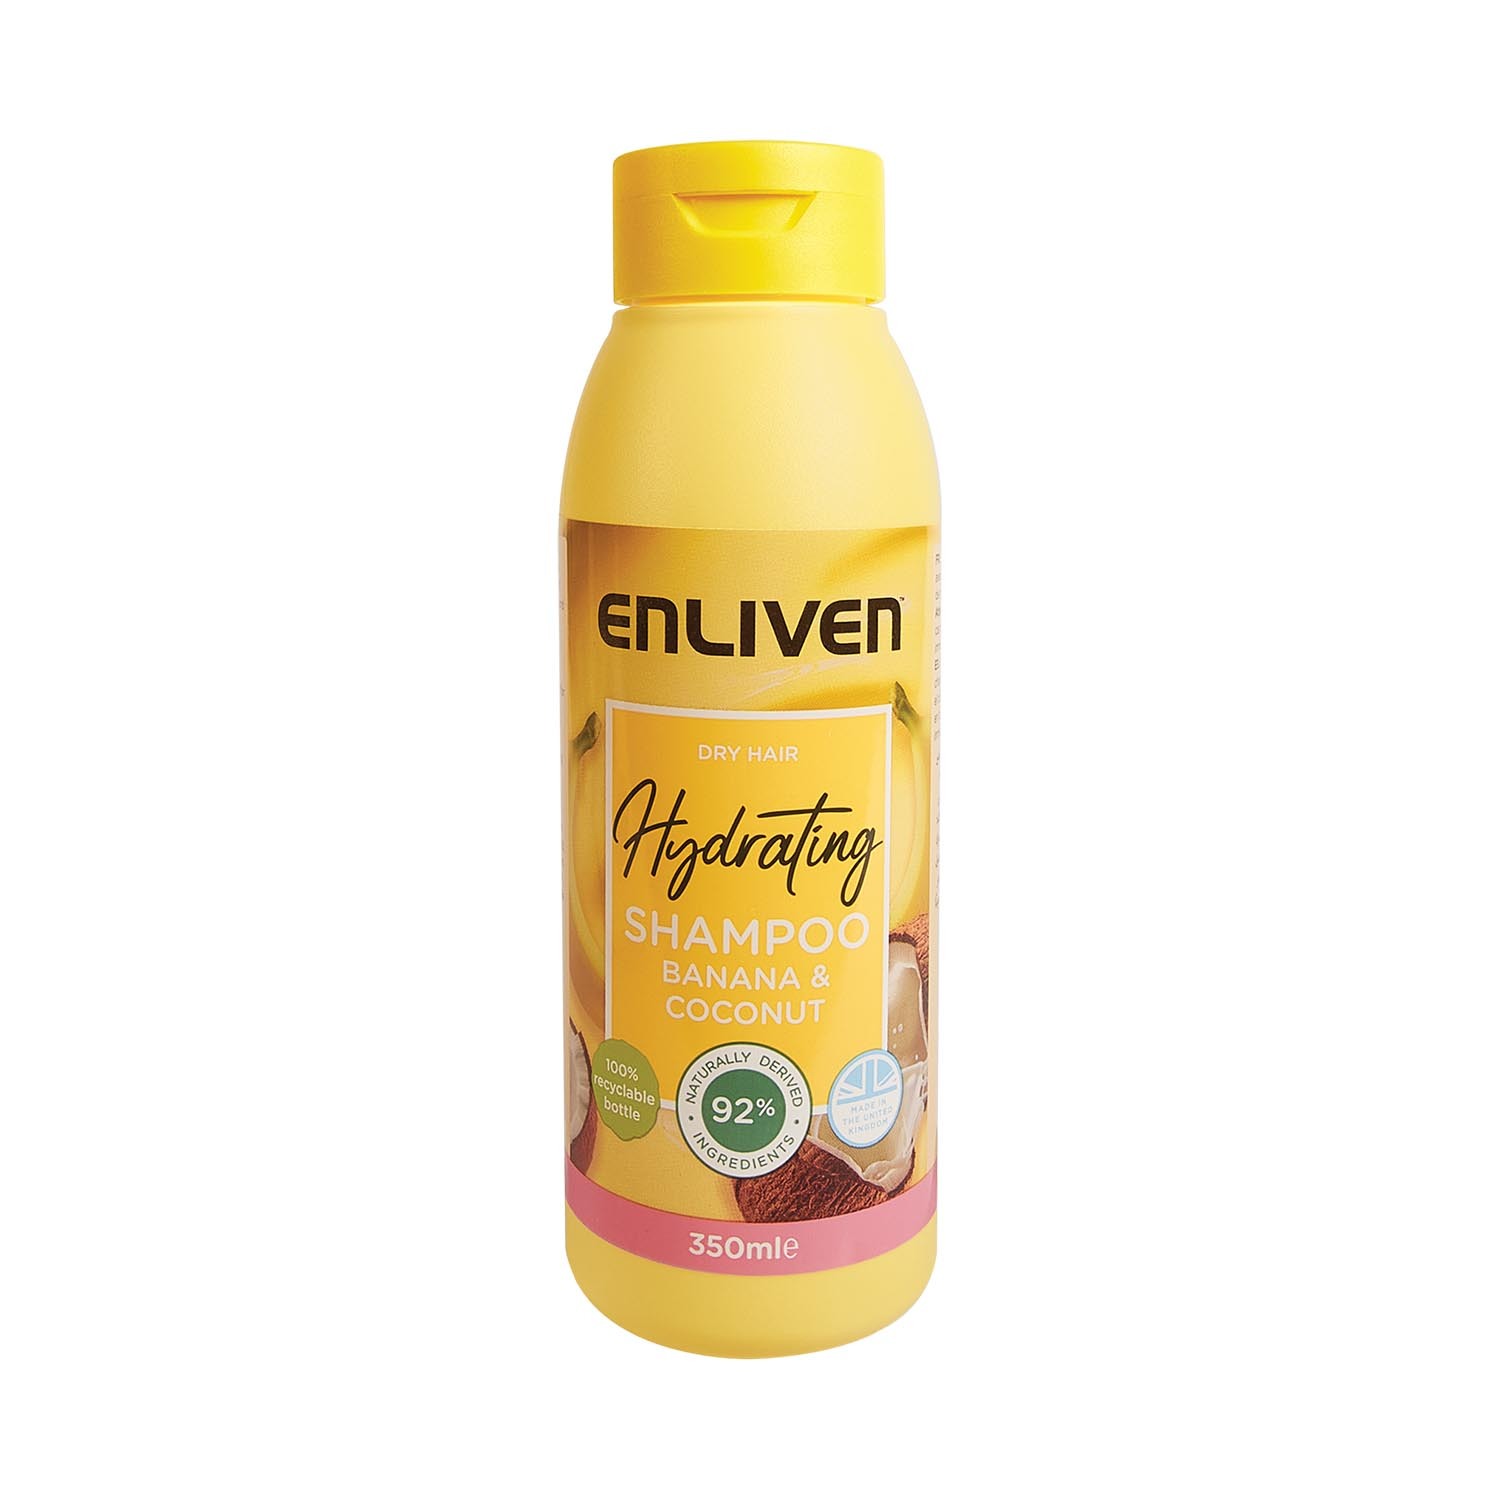 Enliven Hydrating Banana and Coconut Shampoo 350ml Image